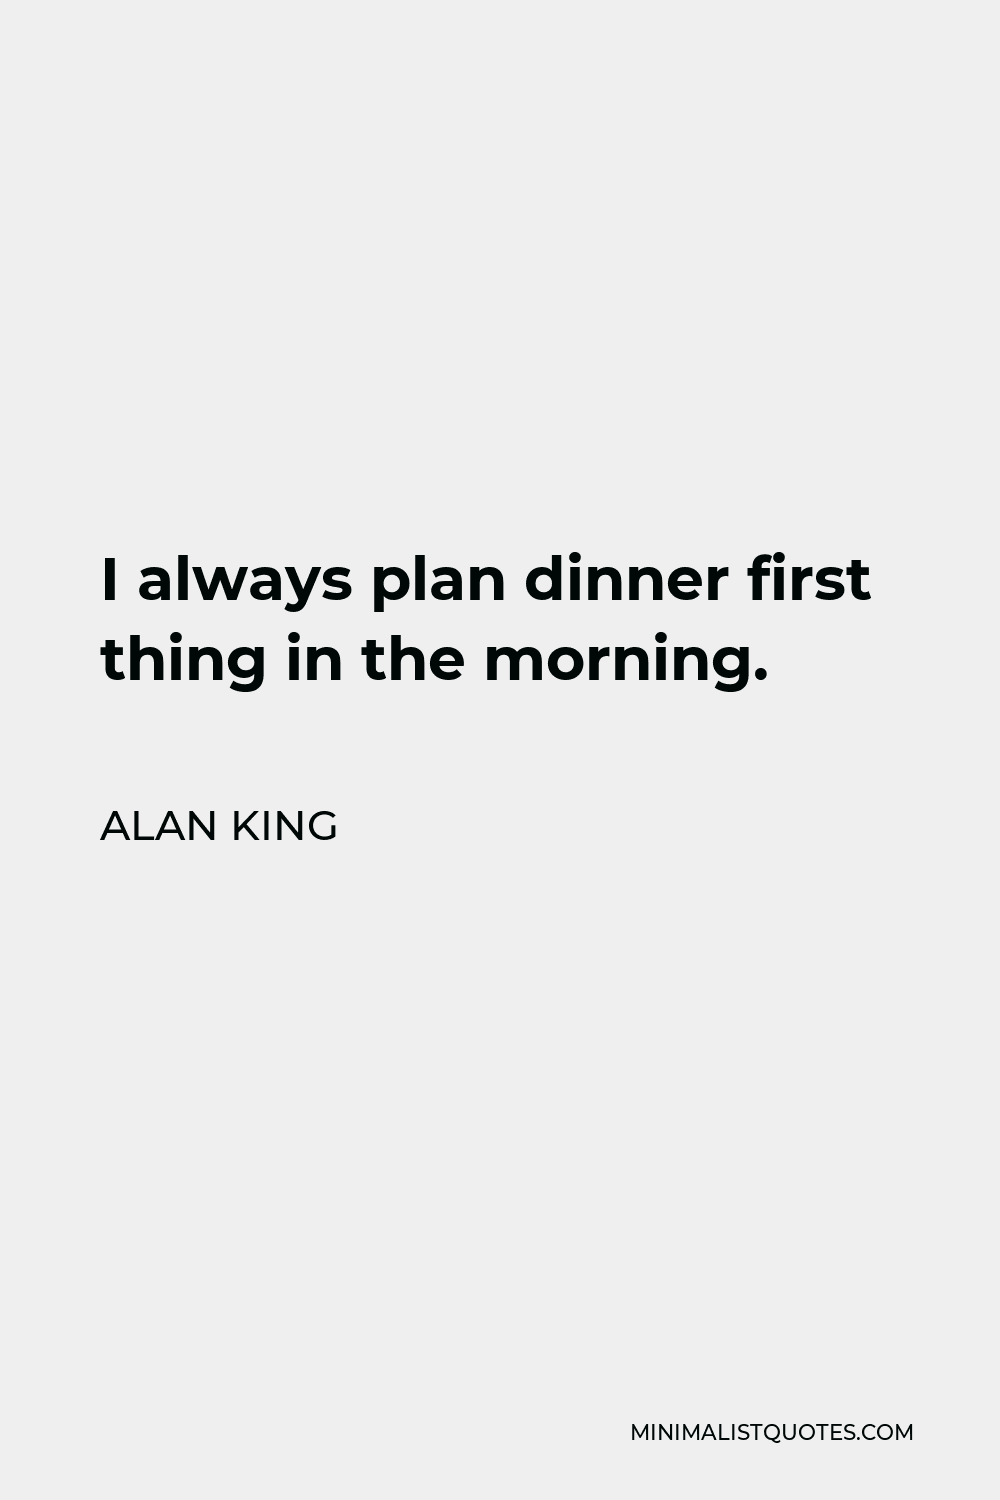 Alan King Quote - I always plan dinner first thing in the morning.